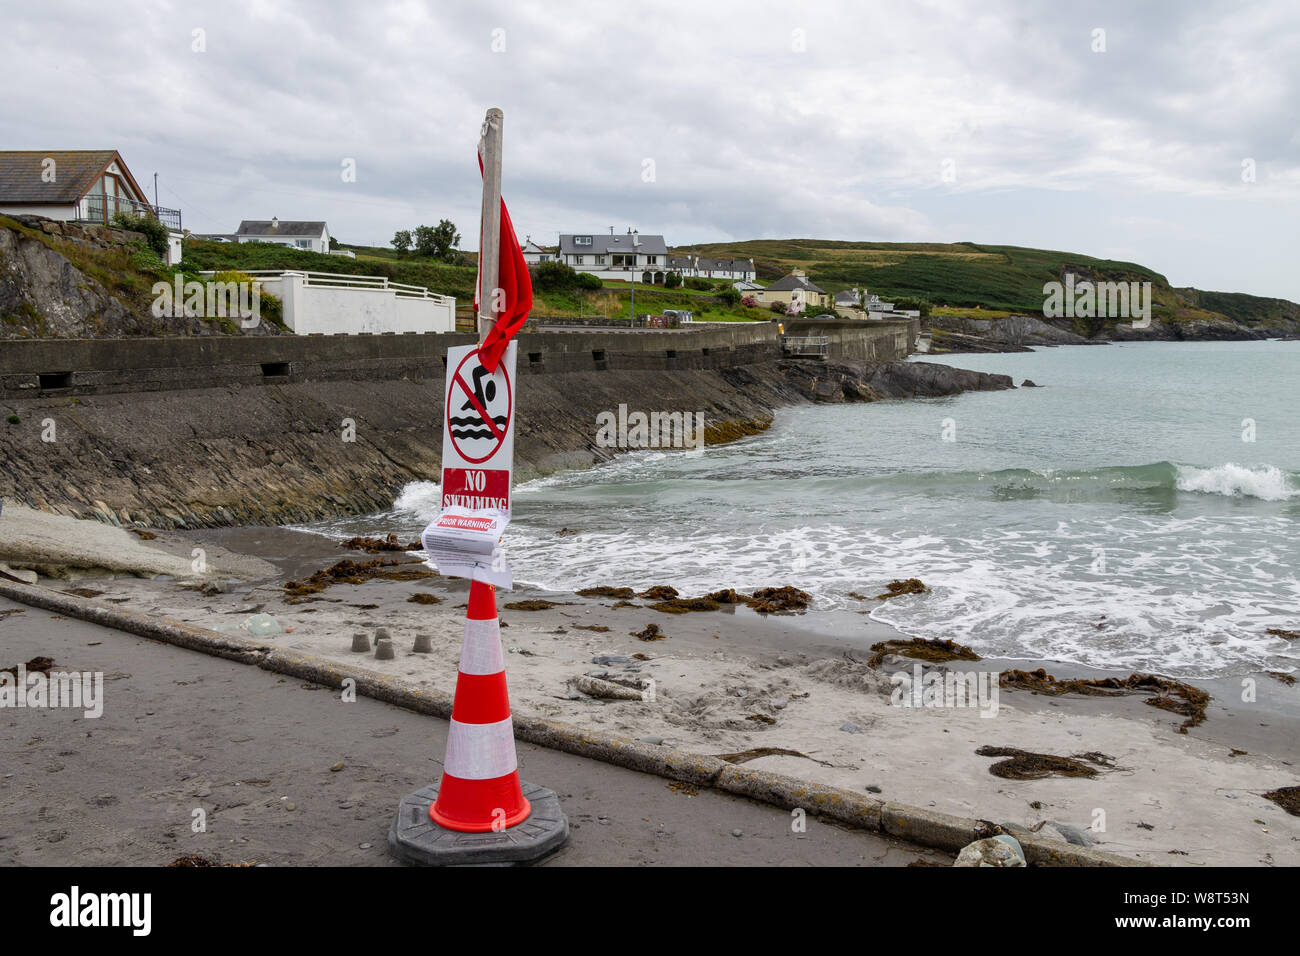 Tragumna, West Cork, Ireland. 10th August 2019. Tragumna Beach a popular holiday beach along with 5 other beaches in County Cork had “No Swim” signs erected over the weekend. The recent heavy rain has been blamed for the notices warning of the possible risk of high bacteria levels. The waters will be retested on Monday 12th August and results made public on 14th August. Credit aphperspective/ Alamy Live News Stock Photo